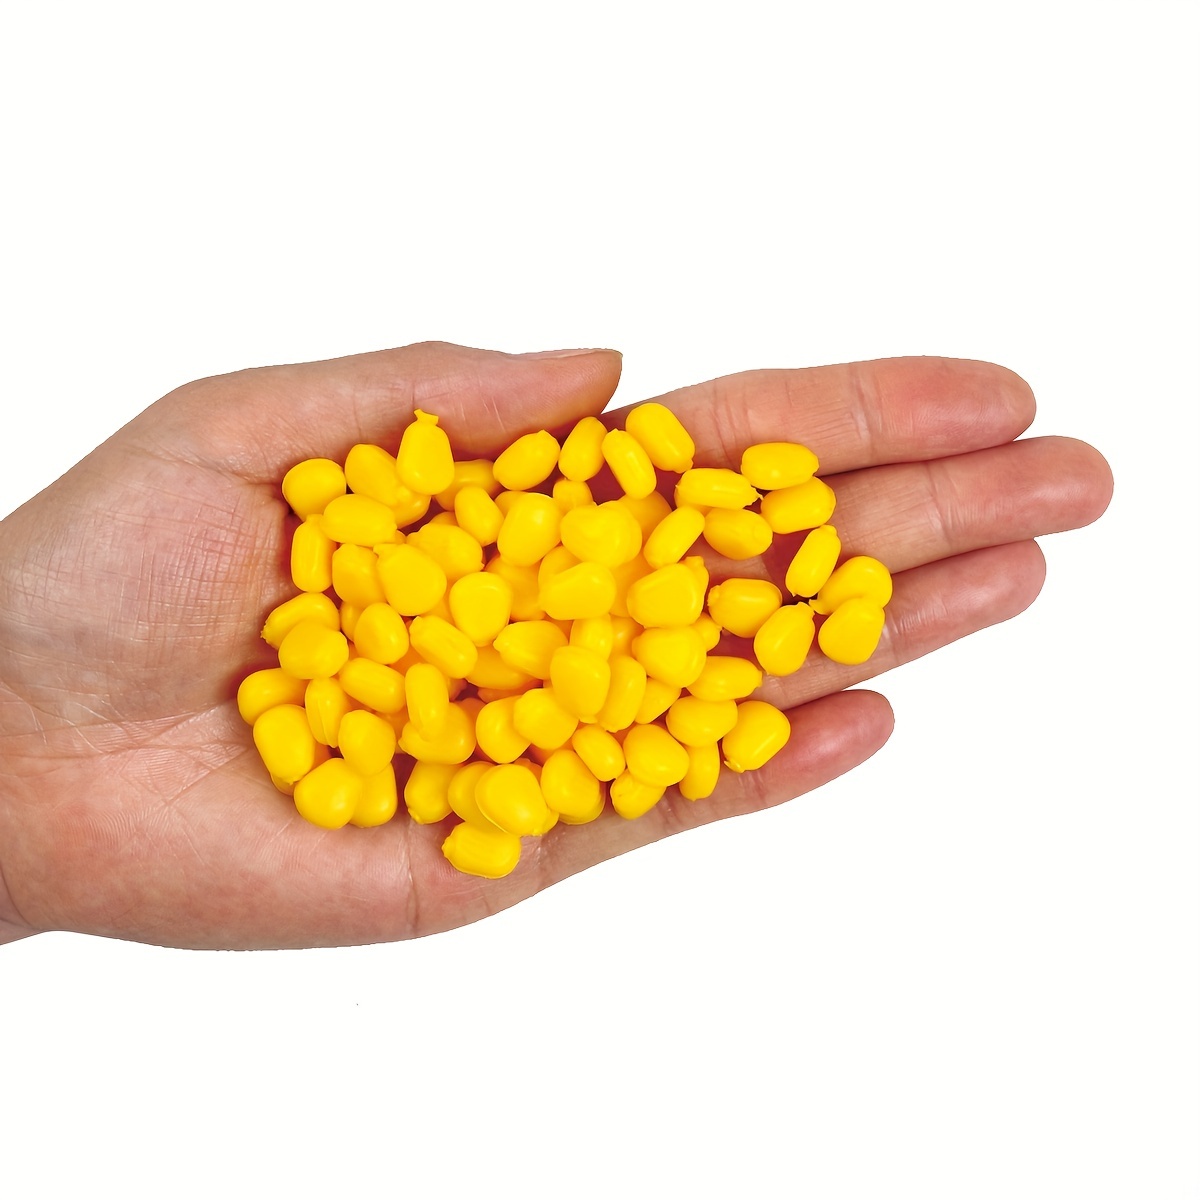 

100pcs Of Deliciously Flavored Corn Kernels - The Perfect Fishing Lures & Bait!